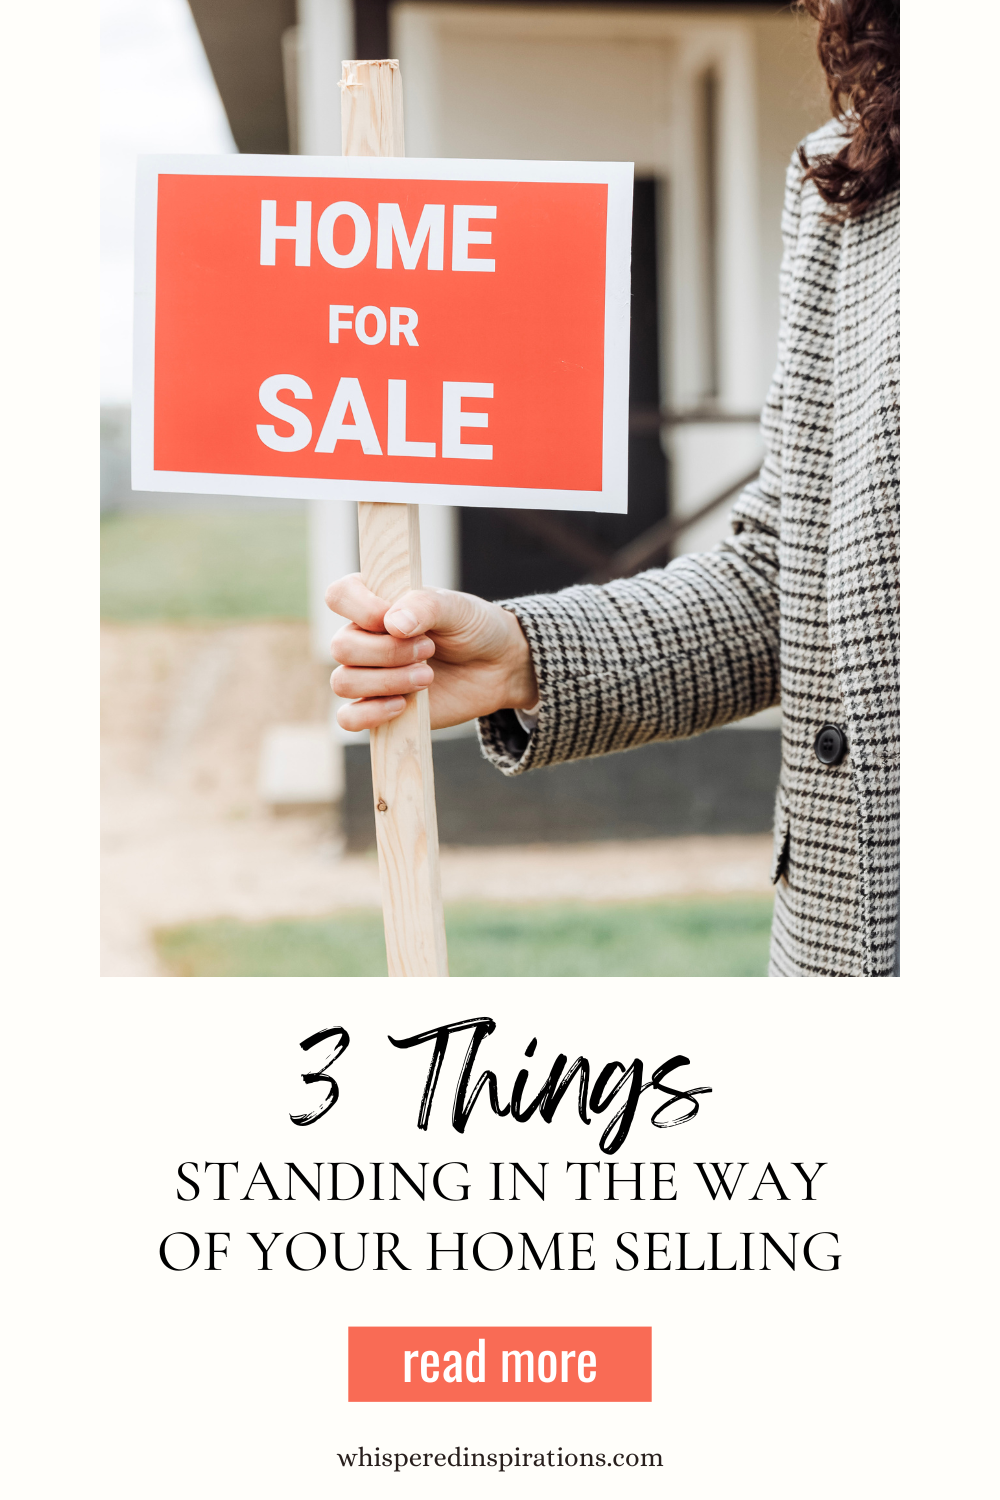 A female realtor holds a Home for Sale sign. This article covers 3 things standing in the way of your home selling.